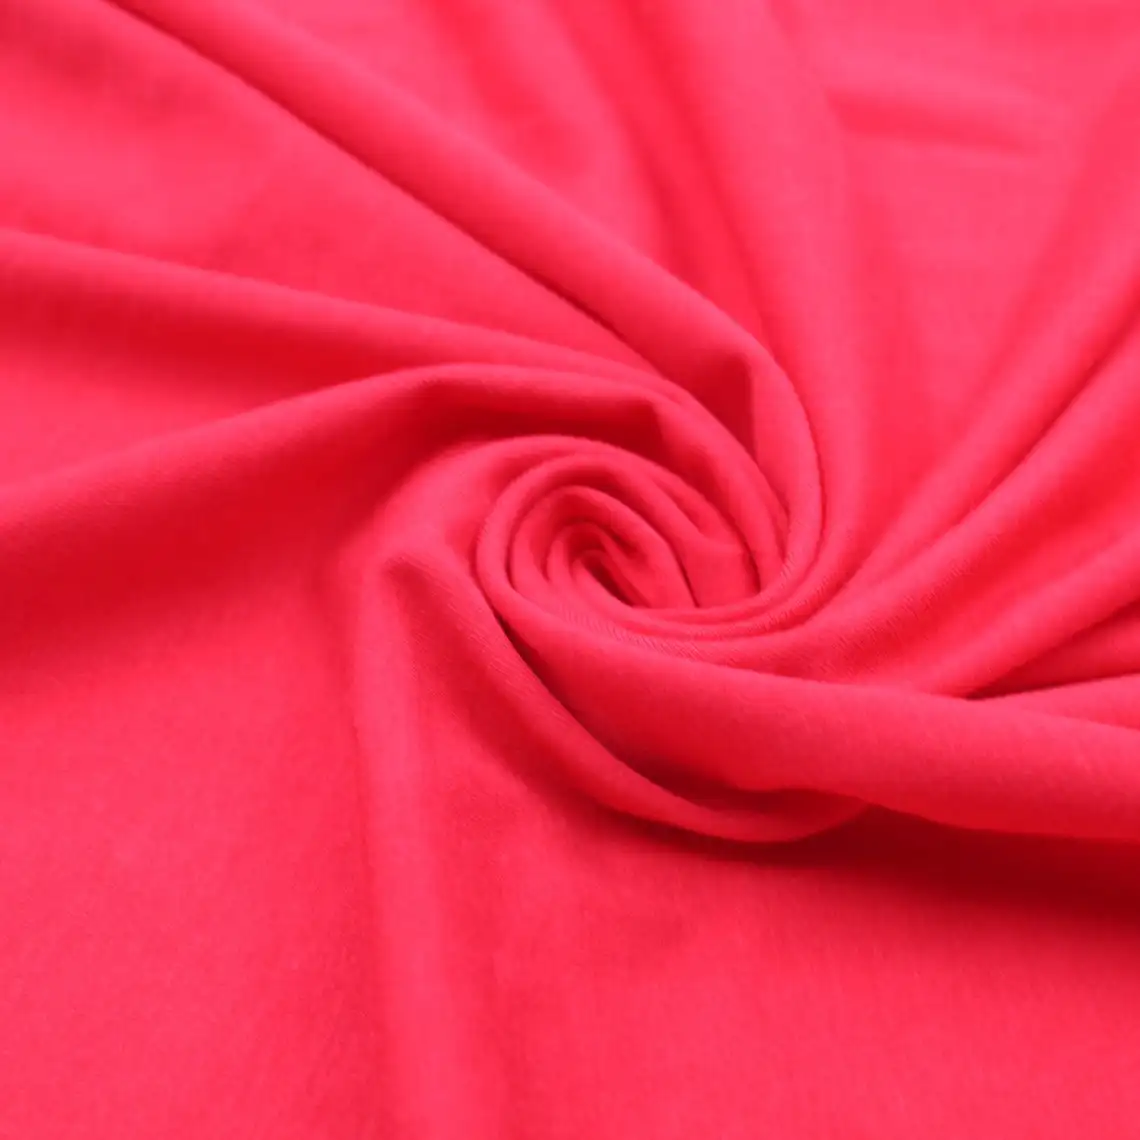 Red Cotton Modal Fabric   160 GSM Style 791 (1700005796726)